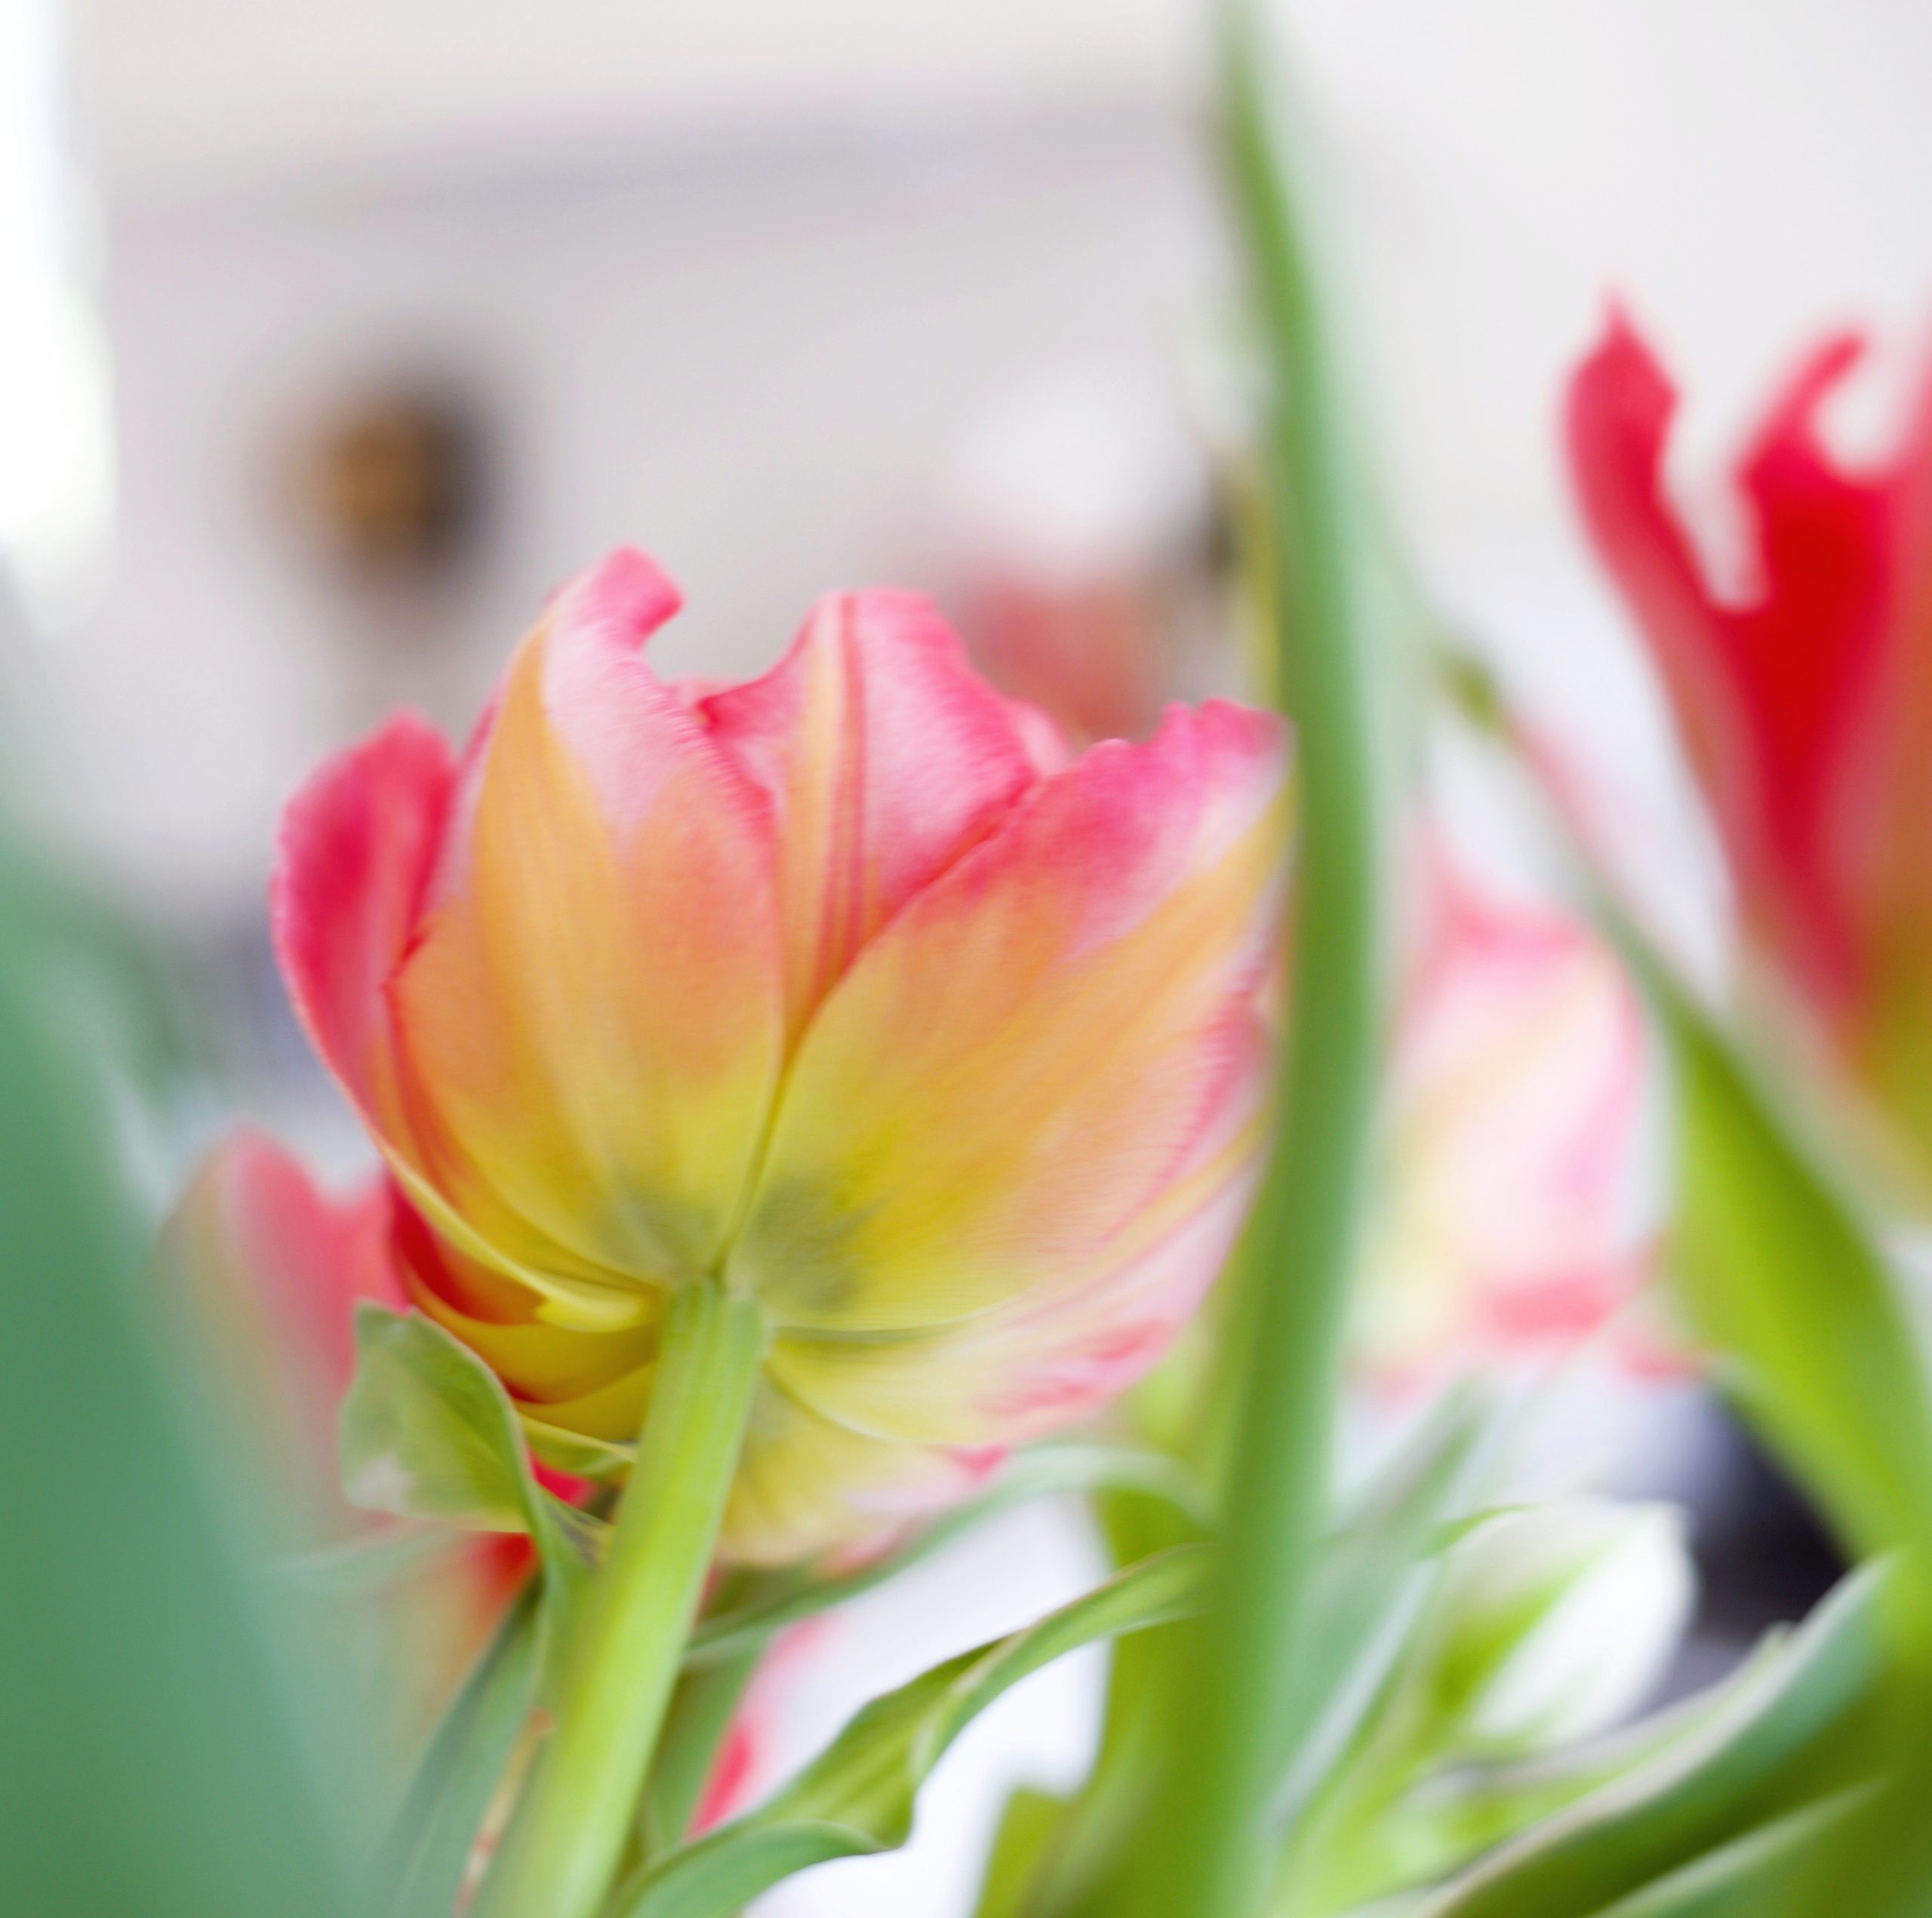 10 Tips For Fresh Cut Tulips